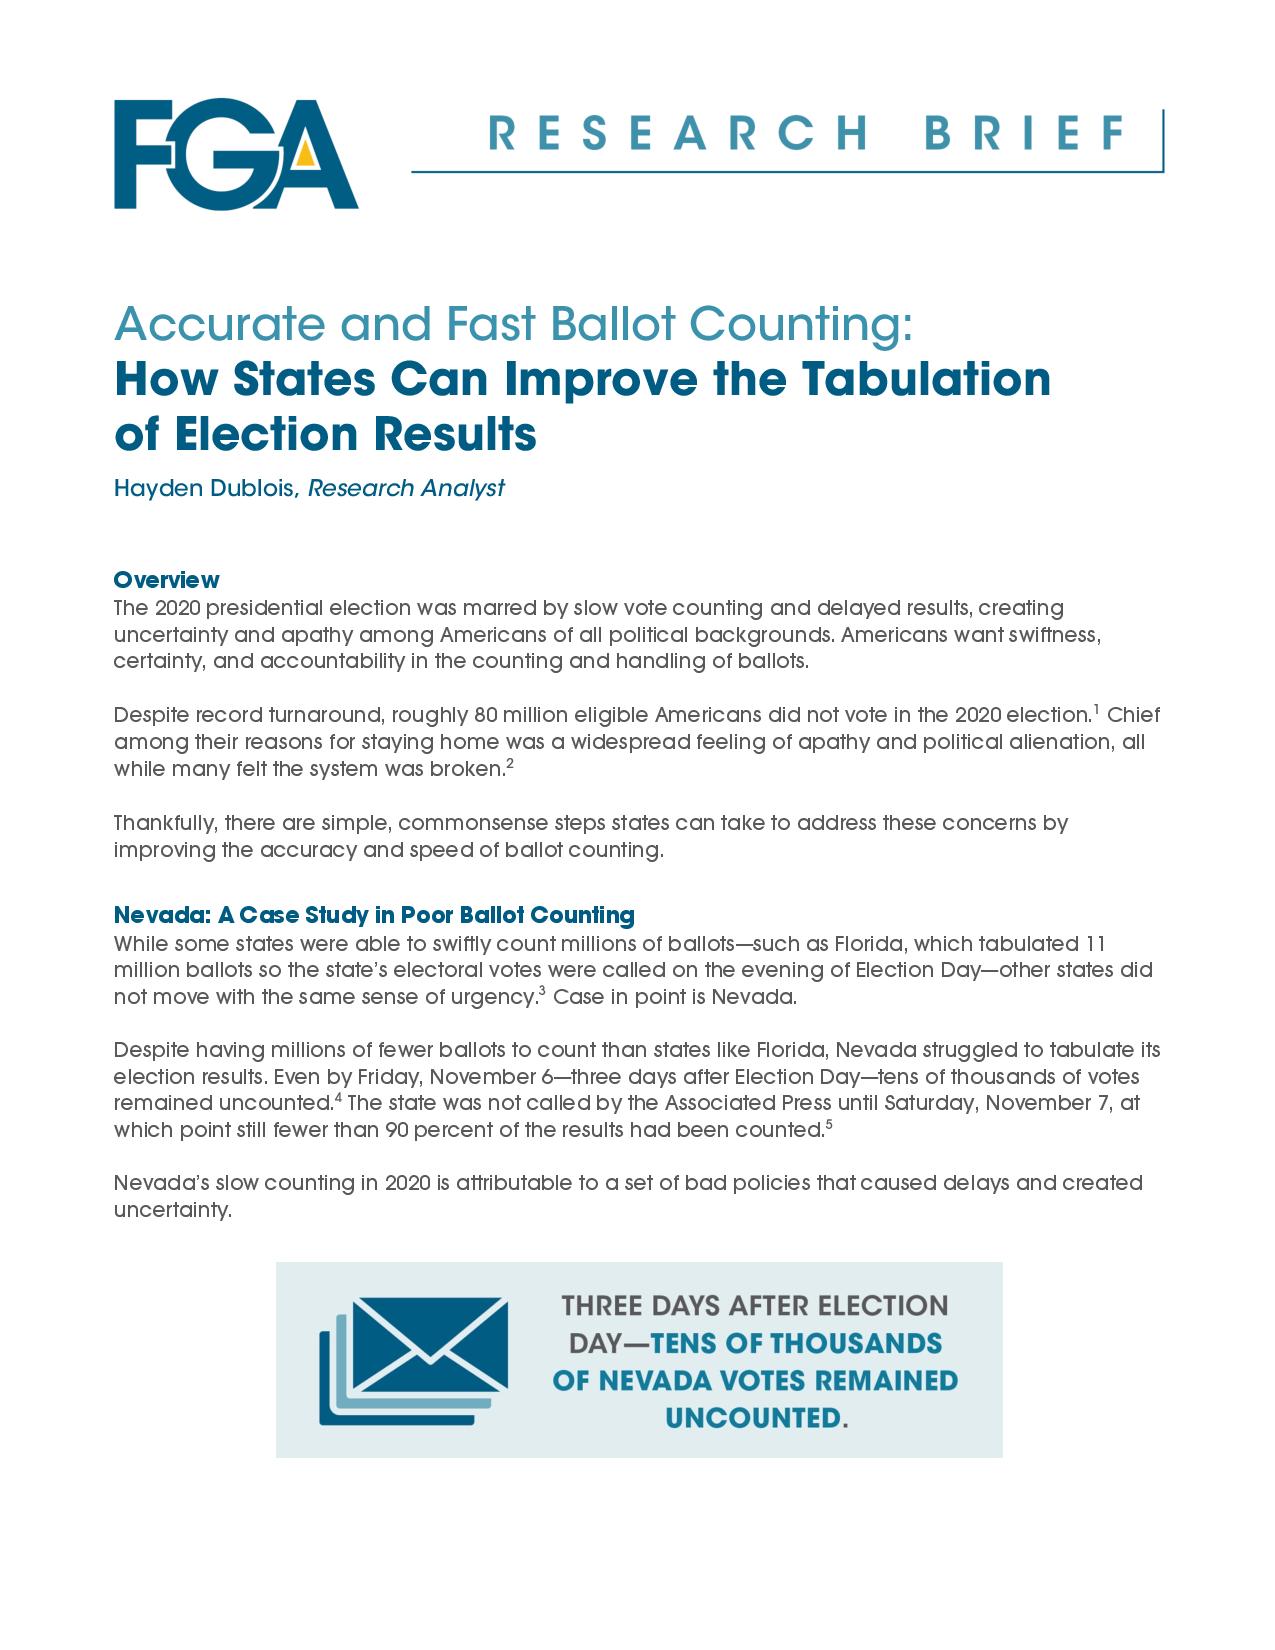 Accurate and Fast Ballot Counting: How States Can Improve the Tabulation of Election Results